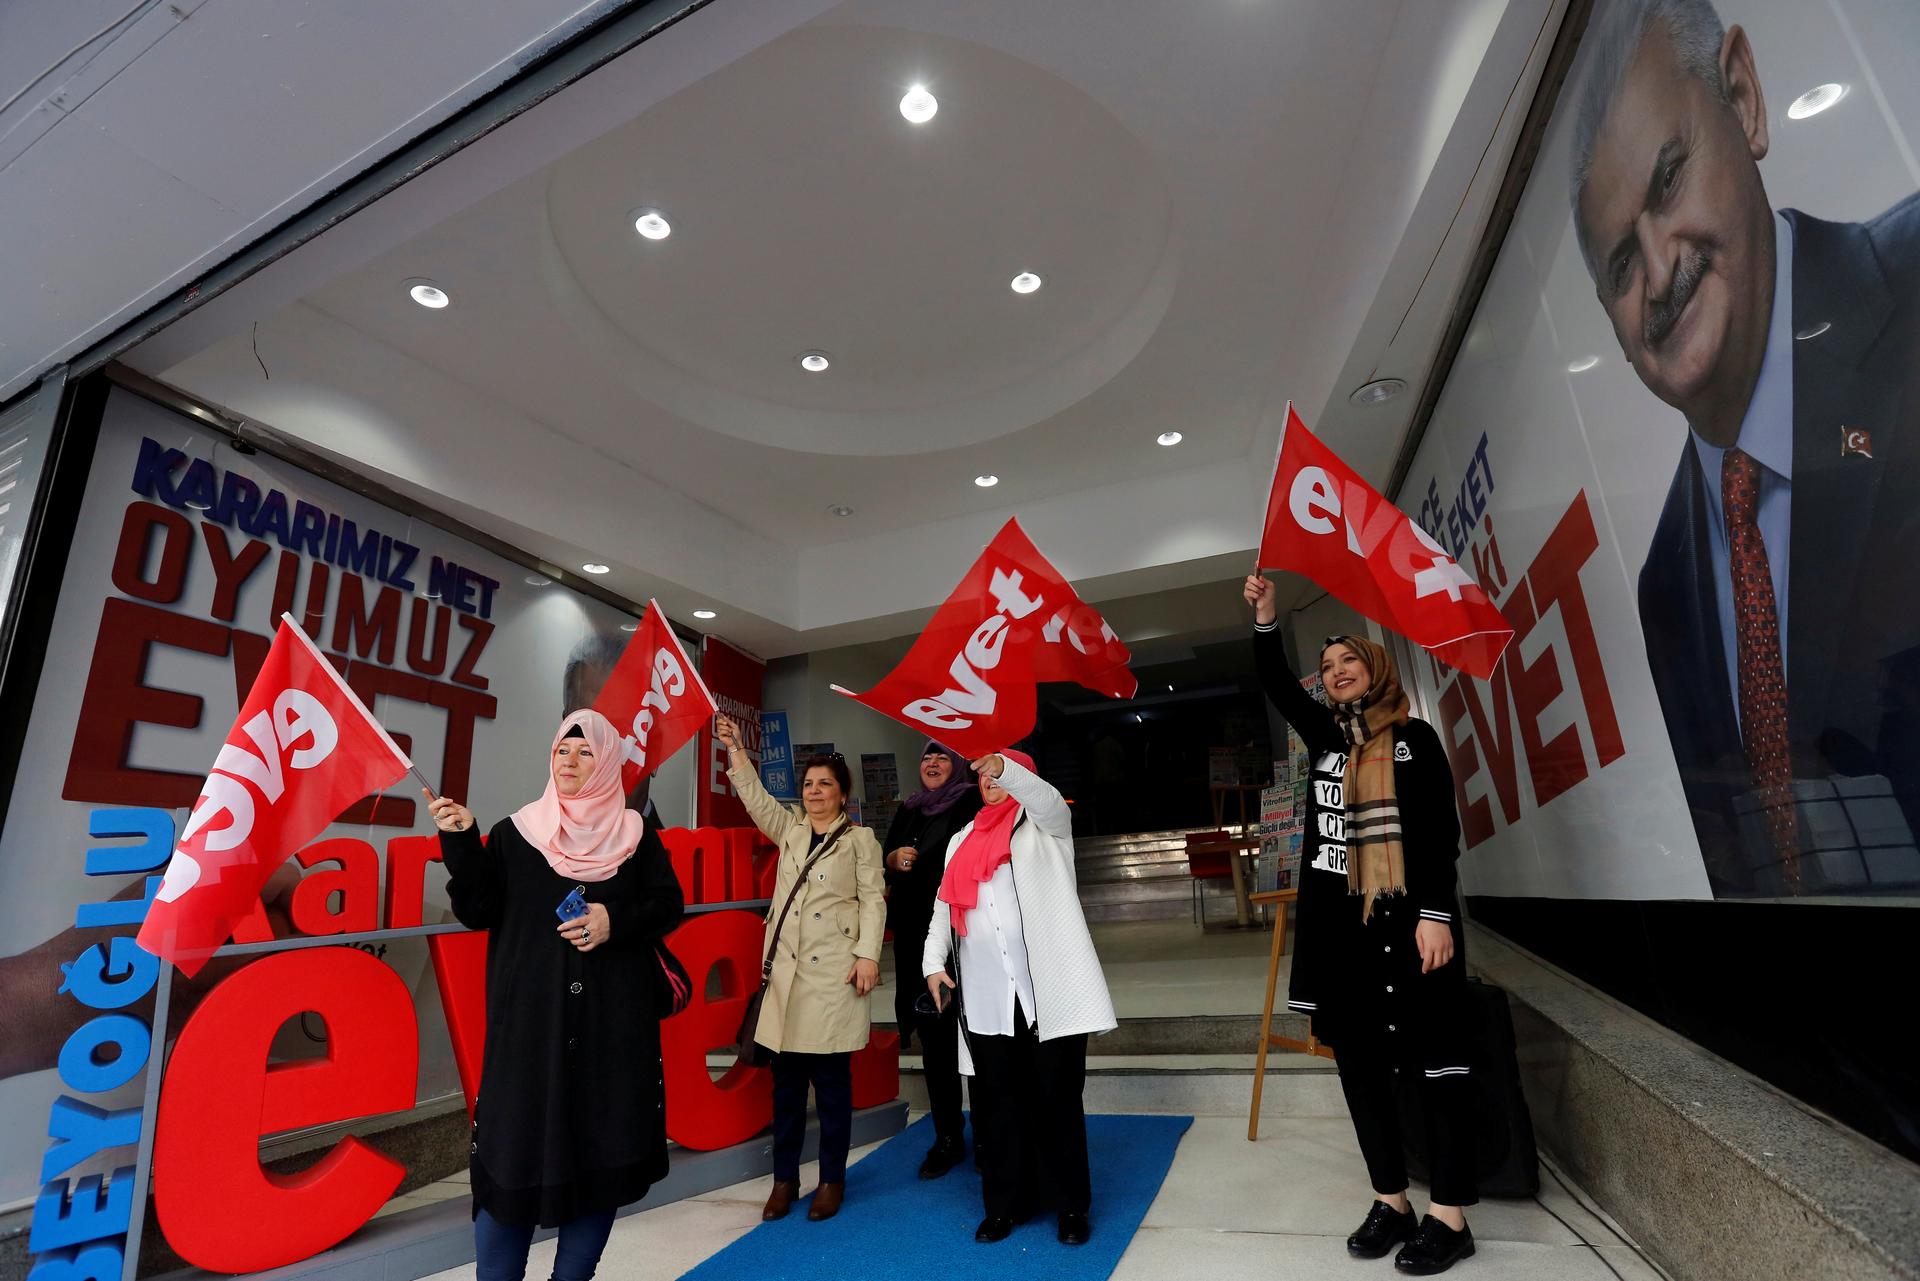 Women wave "Yes" flags at a campaign office of the ruling AK Party